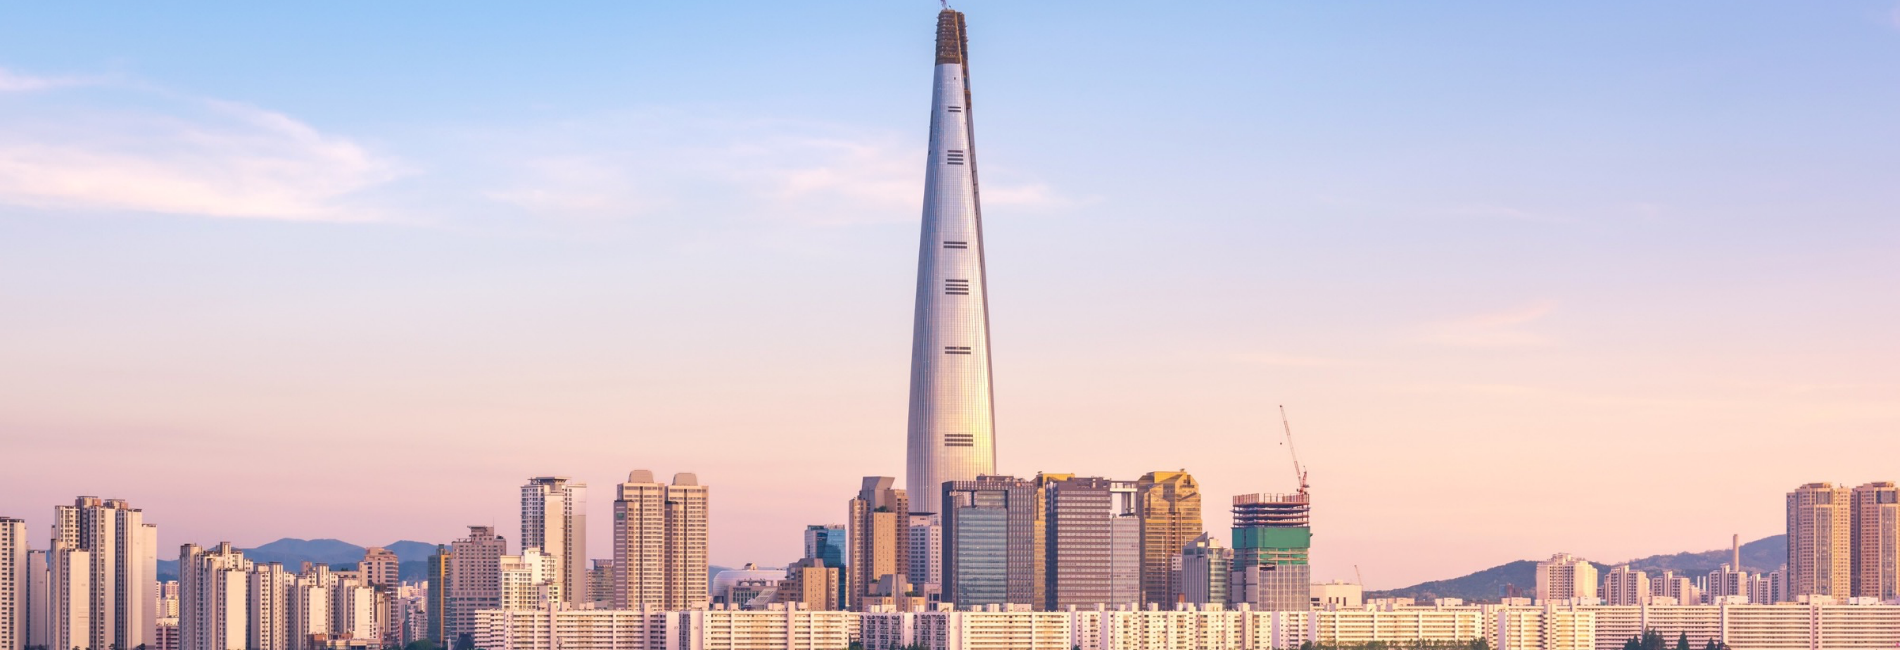 Kkday Exclusive Discount Lotte World Tower Seoul Sky Ticket